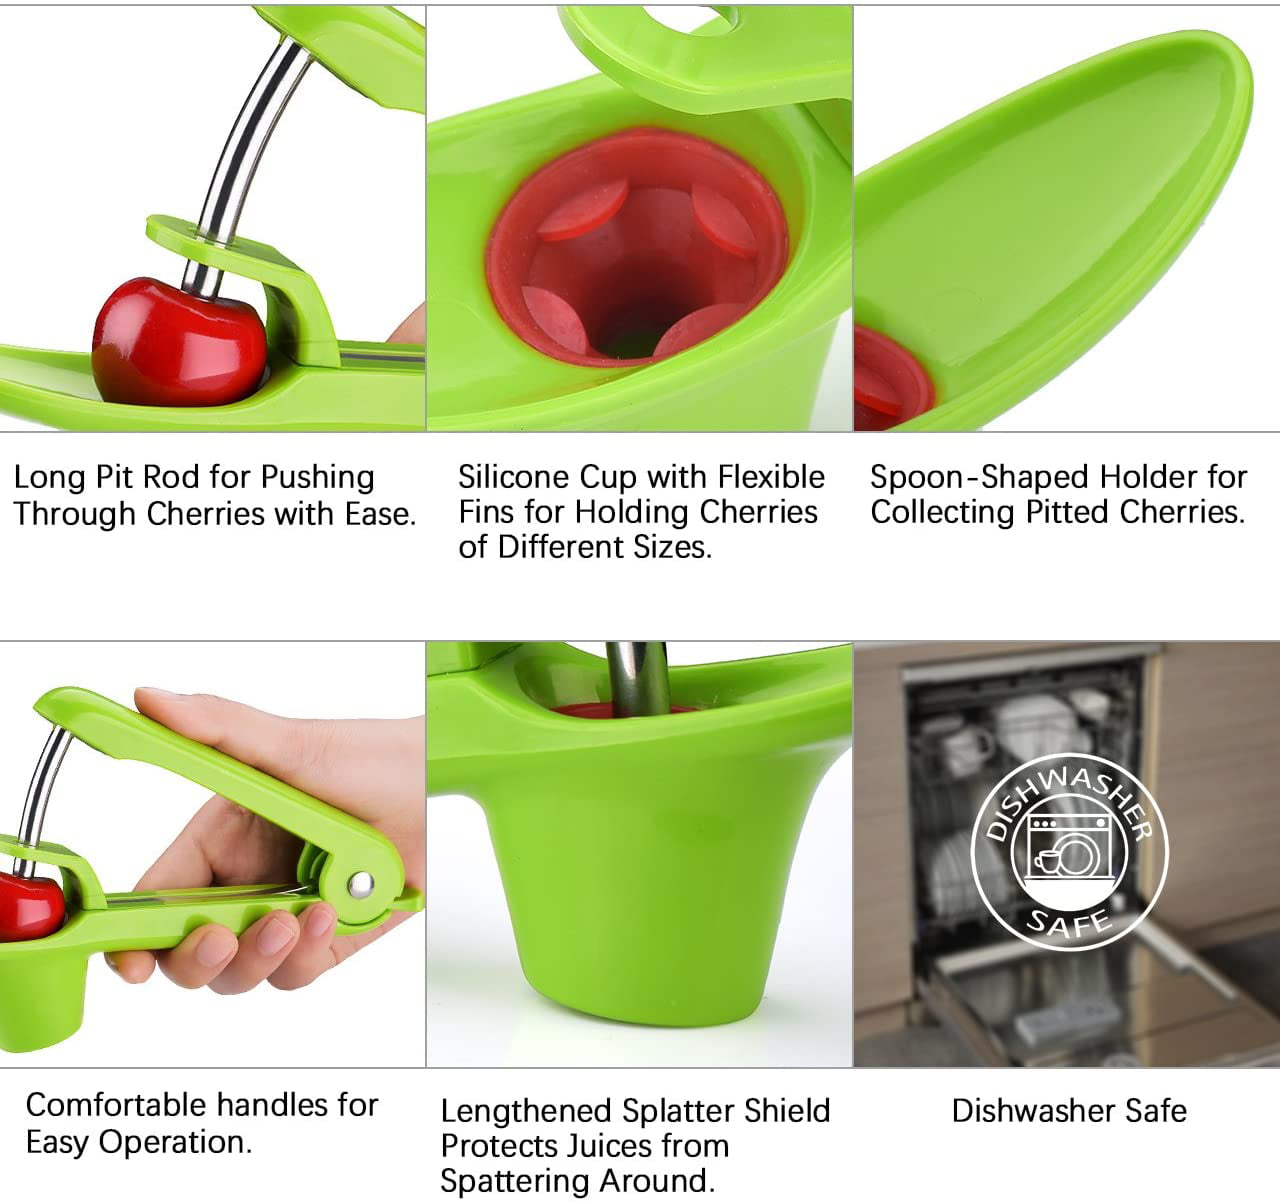 Space-Saving Lock Design Cherry Stoner with Food-Grade Silicone Cup and Lengthened Splatter Shield Dishwasher Safe Micowin Cheery Pitter 